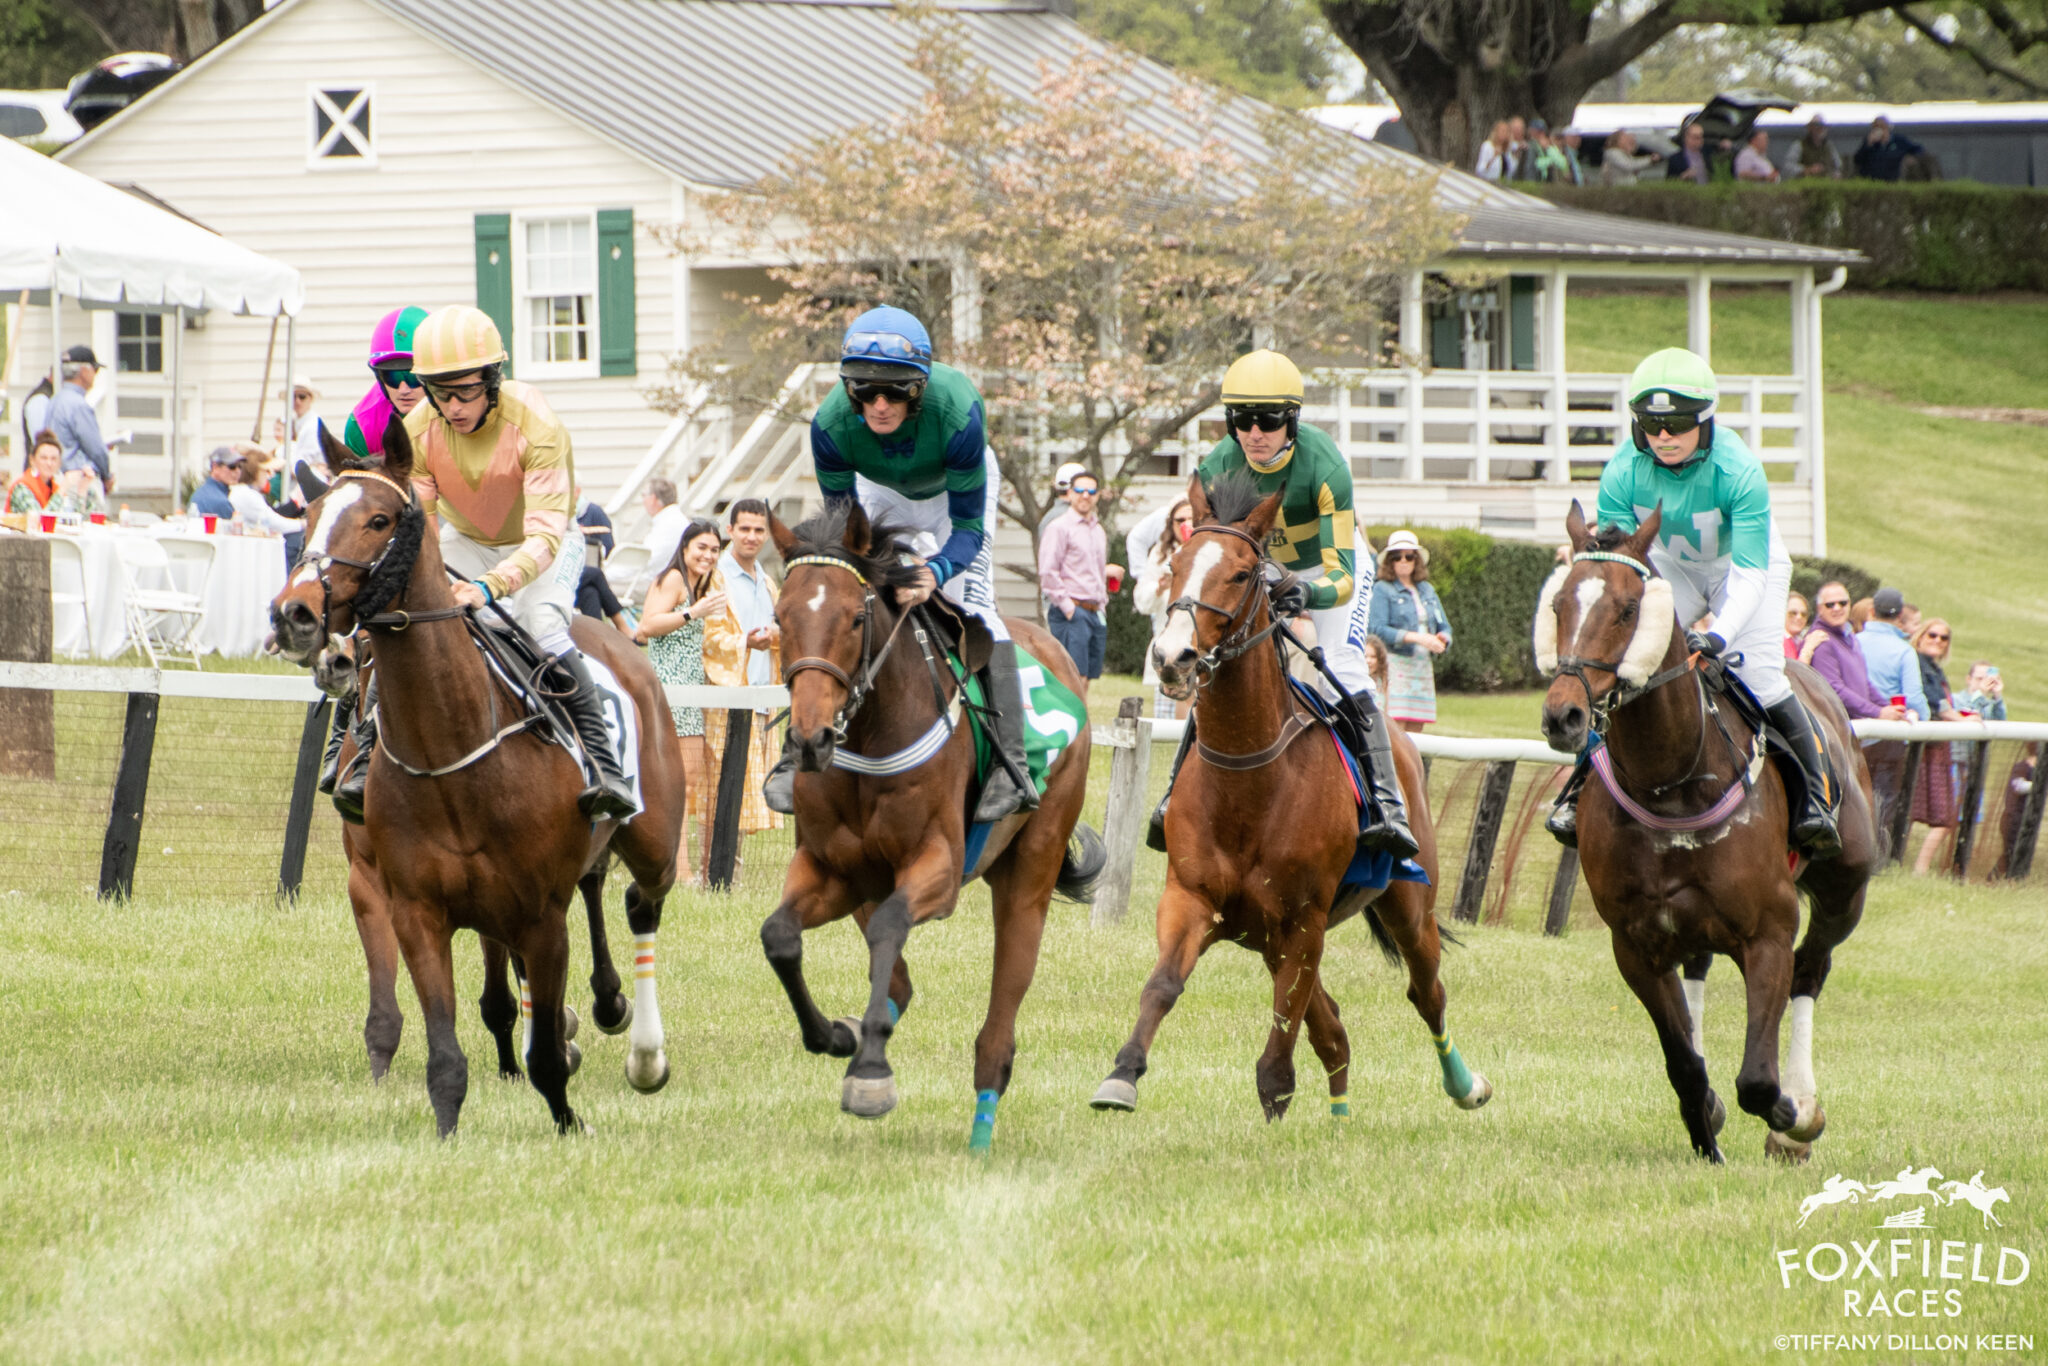 Foxfield Races Steeplechase Racing in the Heart of Virginia